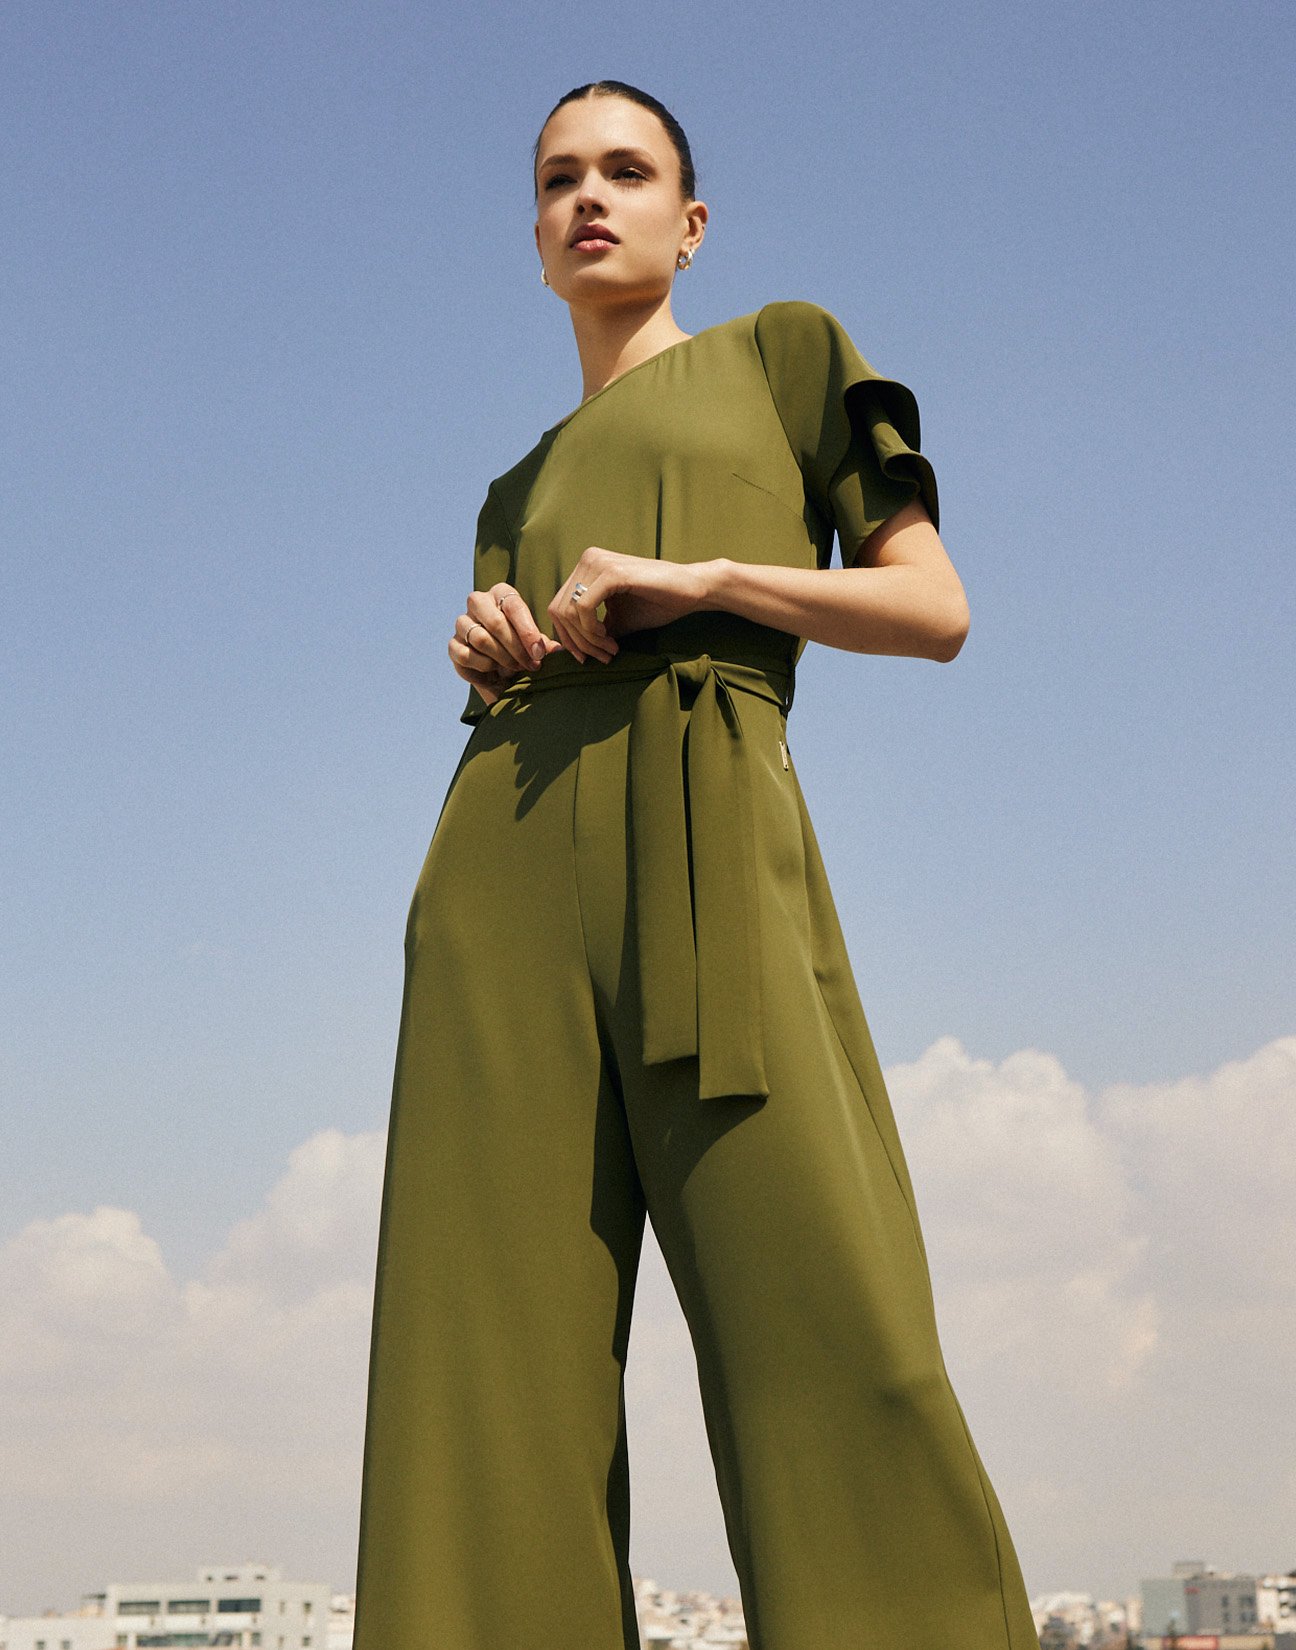 Jumpsuit with ruffles